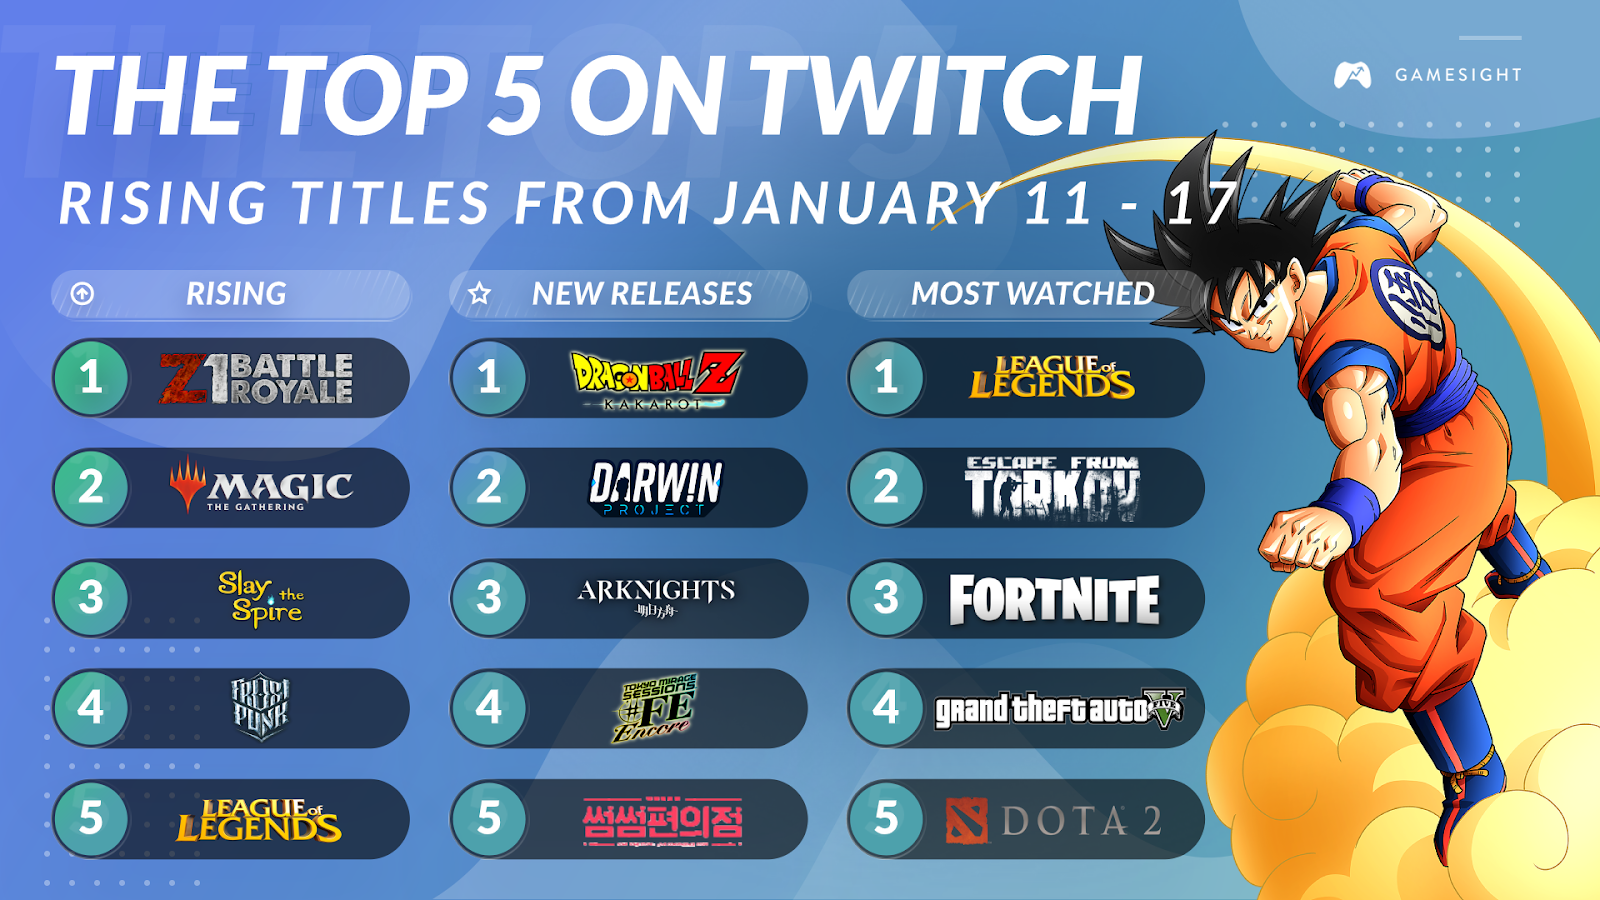 Top 10 Esports Twitch Streamers - All-Time & 2020 Rankings